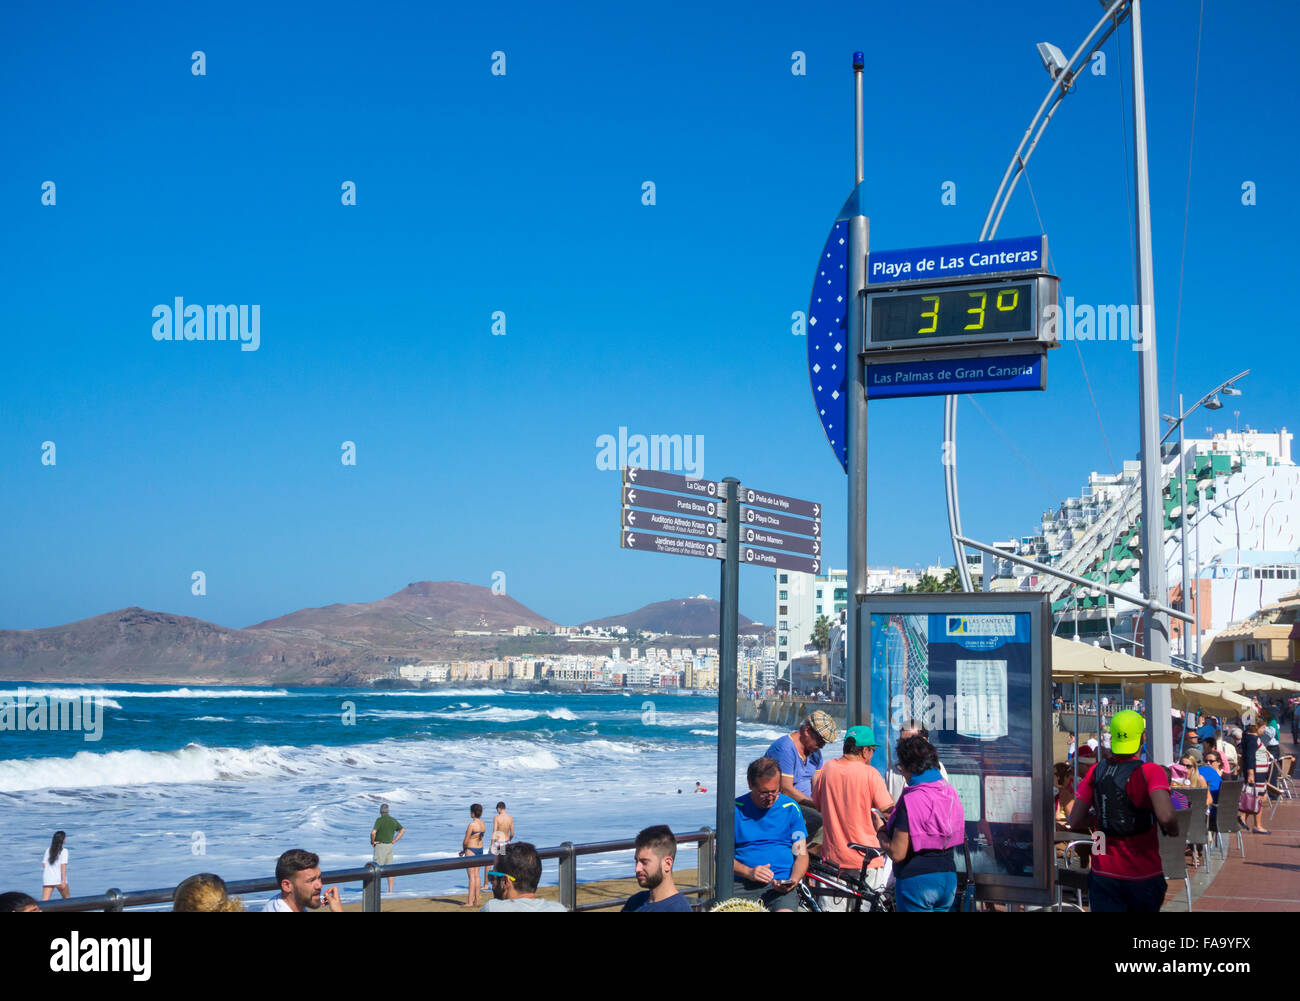 Las Palmas, Gran Canaria, Canary Islands, Spain. 24th December, 2015.  Weather: As another winter storm hits the UK, it`s a glorious Christmas Eve  on Las Canteras beach in Las Palmas on Gran